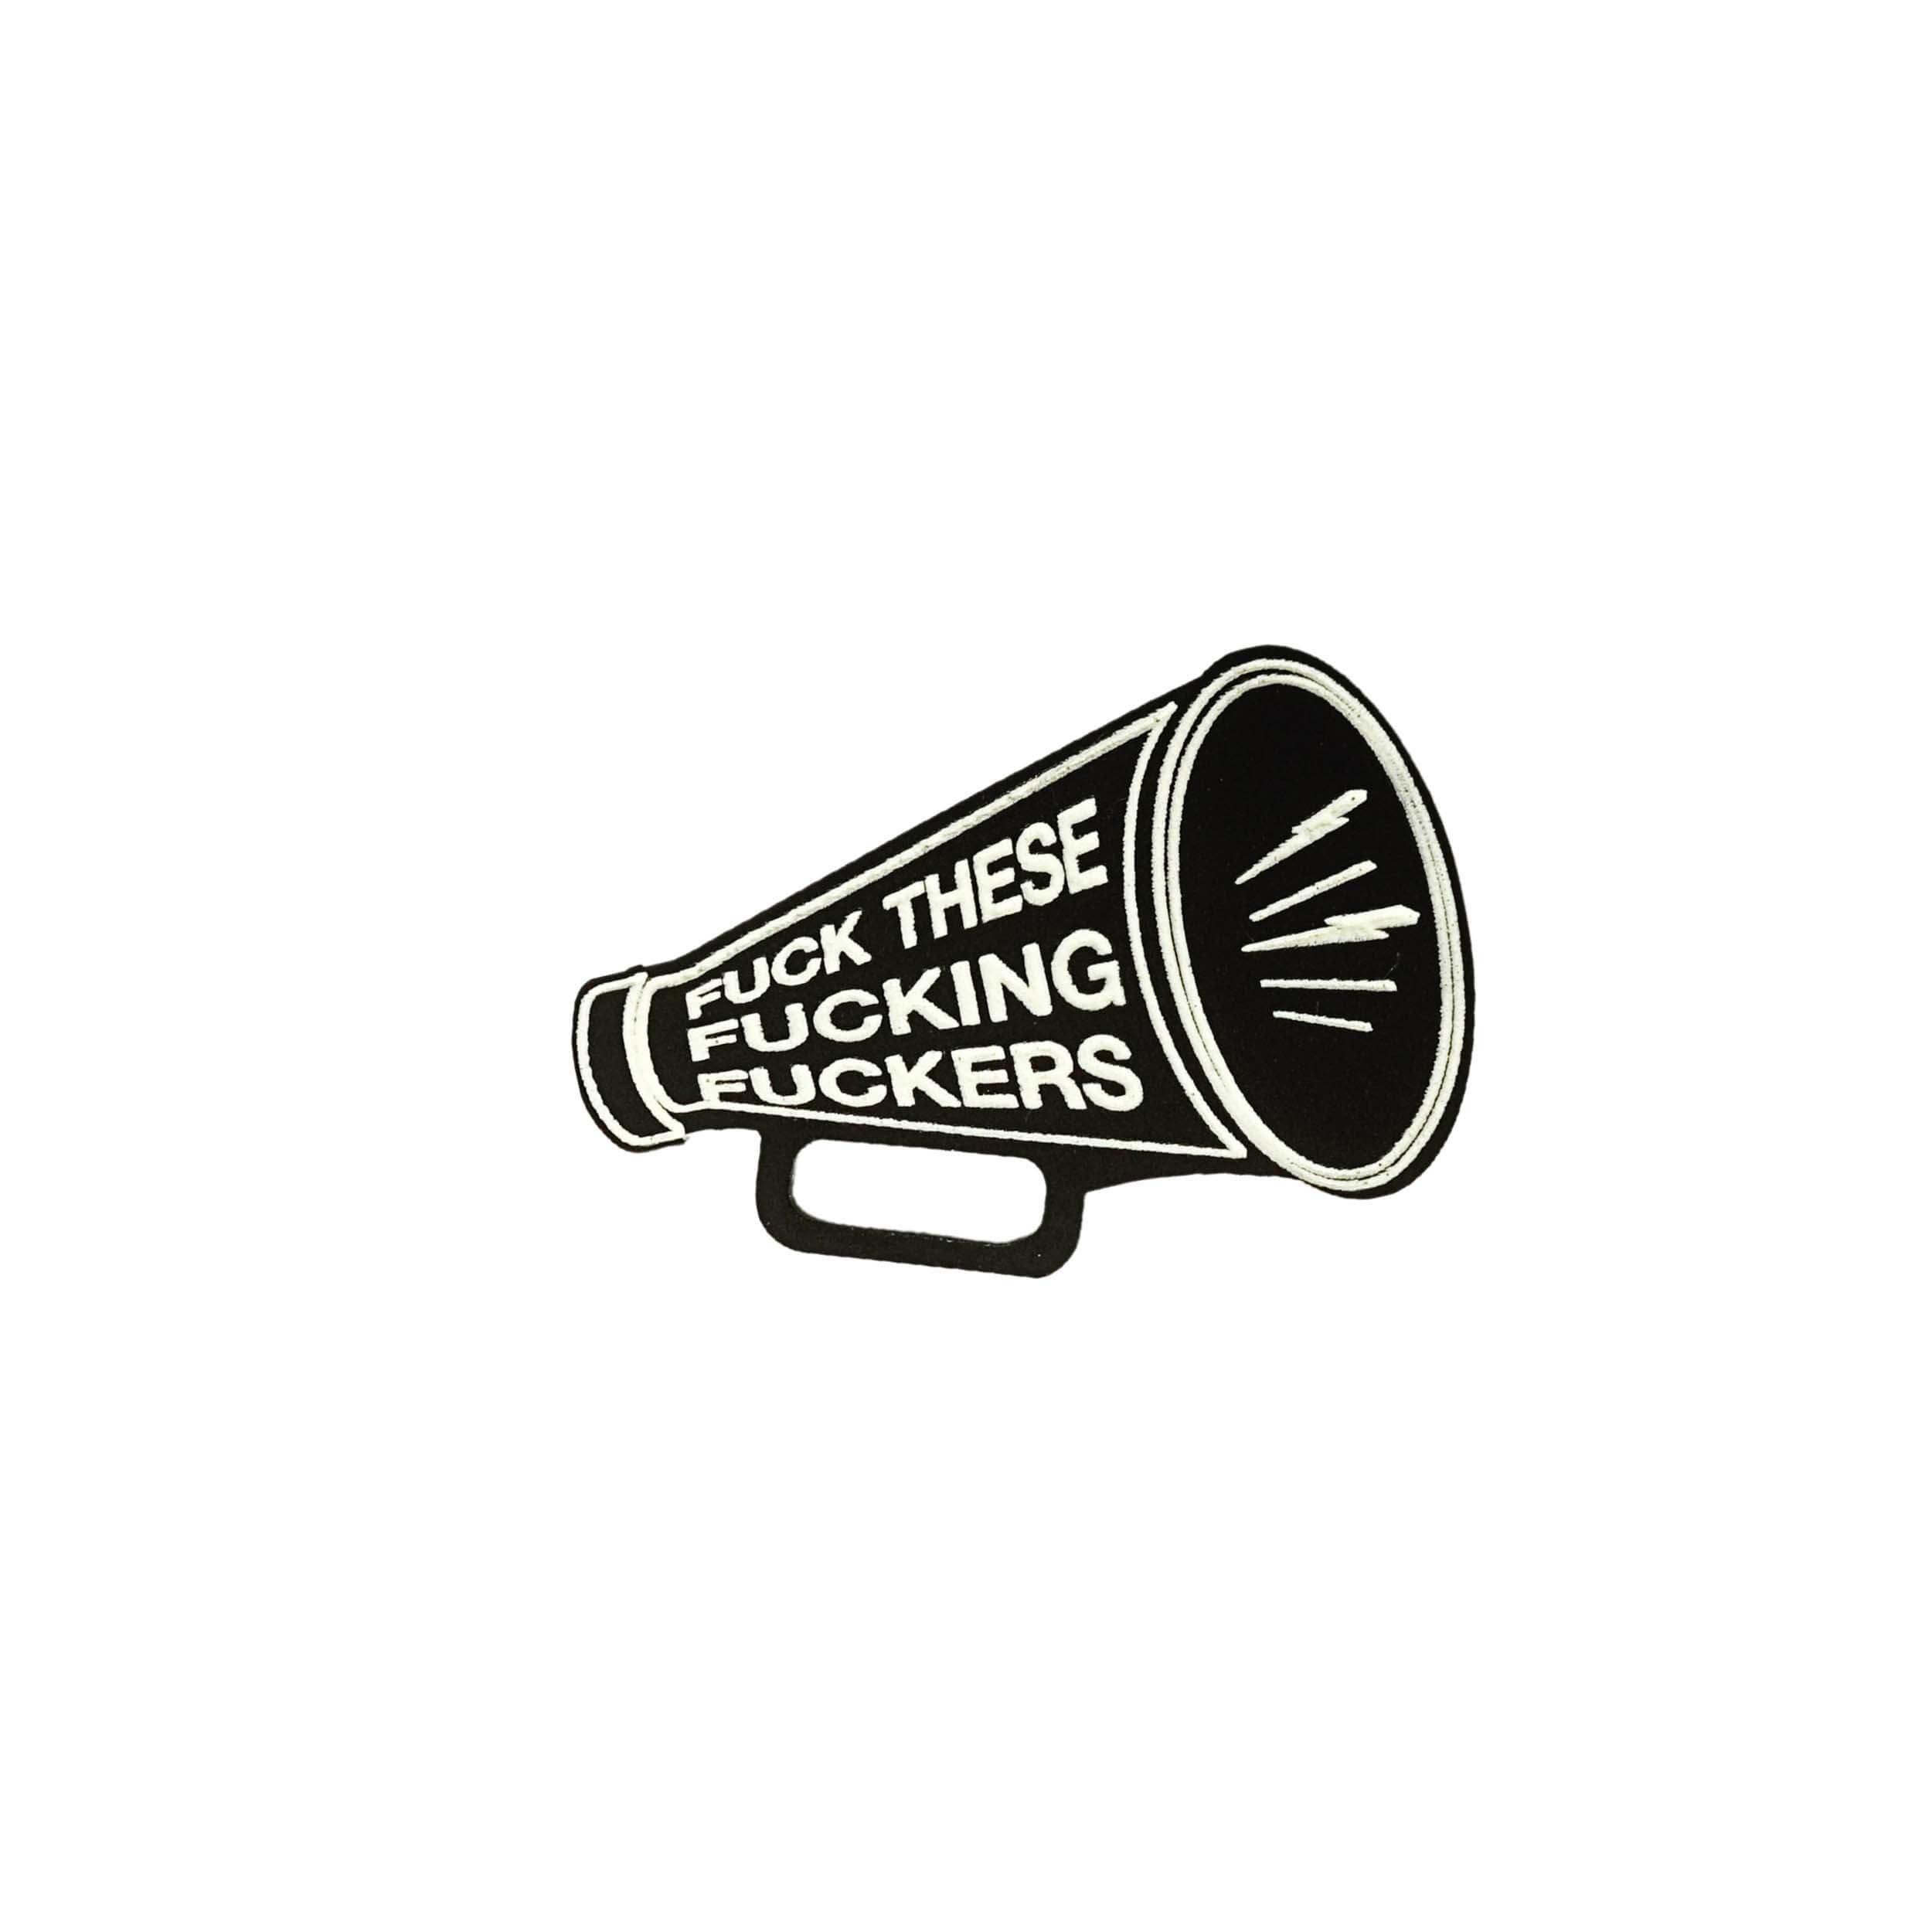 F*CK THESE F*CKING F*CKERS Megaphone brooch, for when you're quietly screaming inside. 